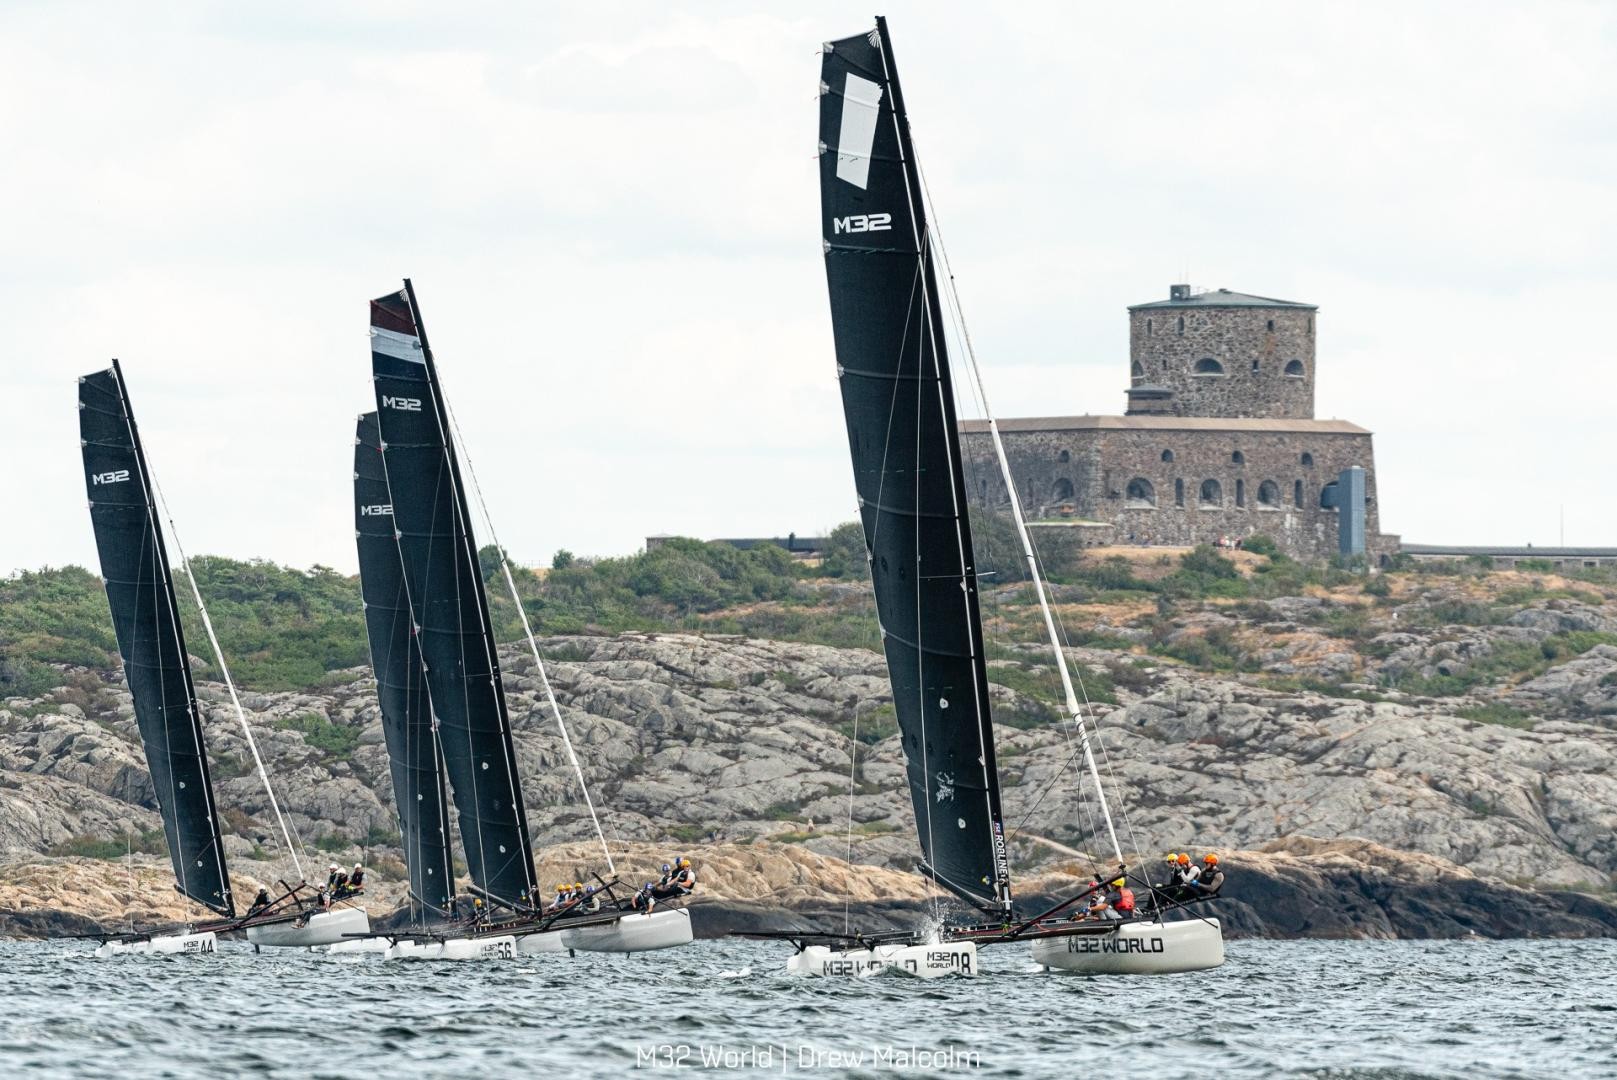 Newport Delivers - Next Marstrand for the M32 fleet